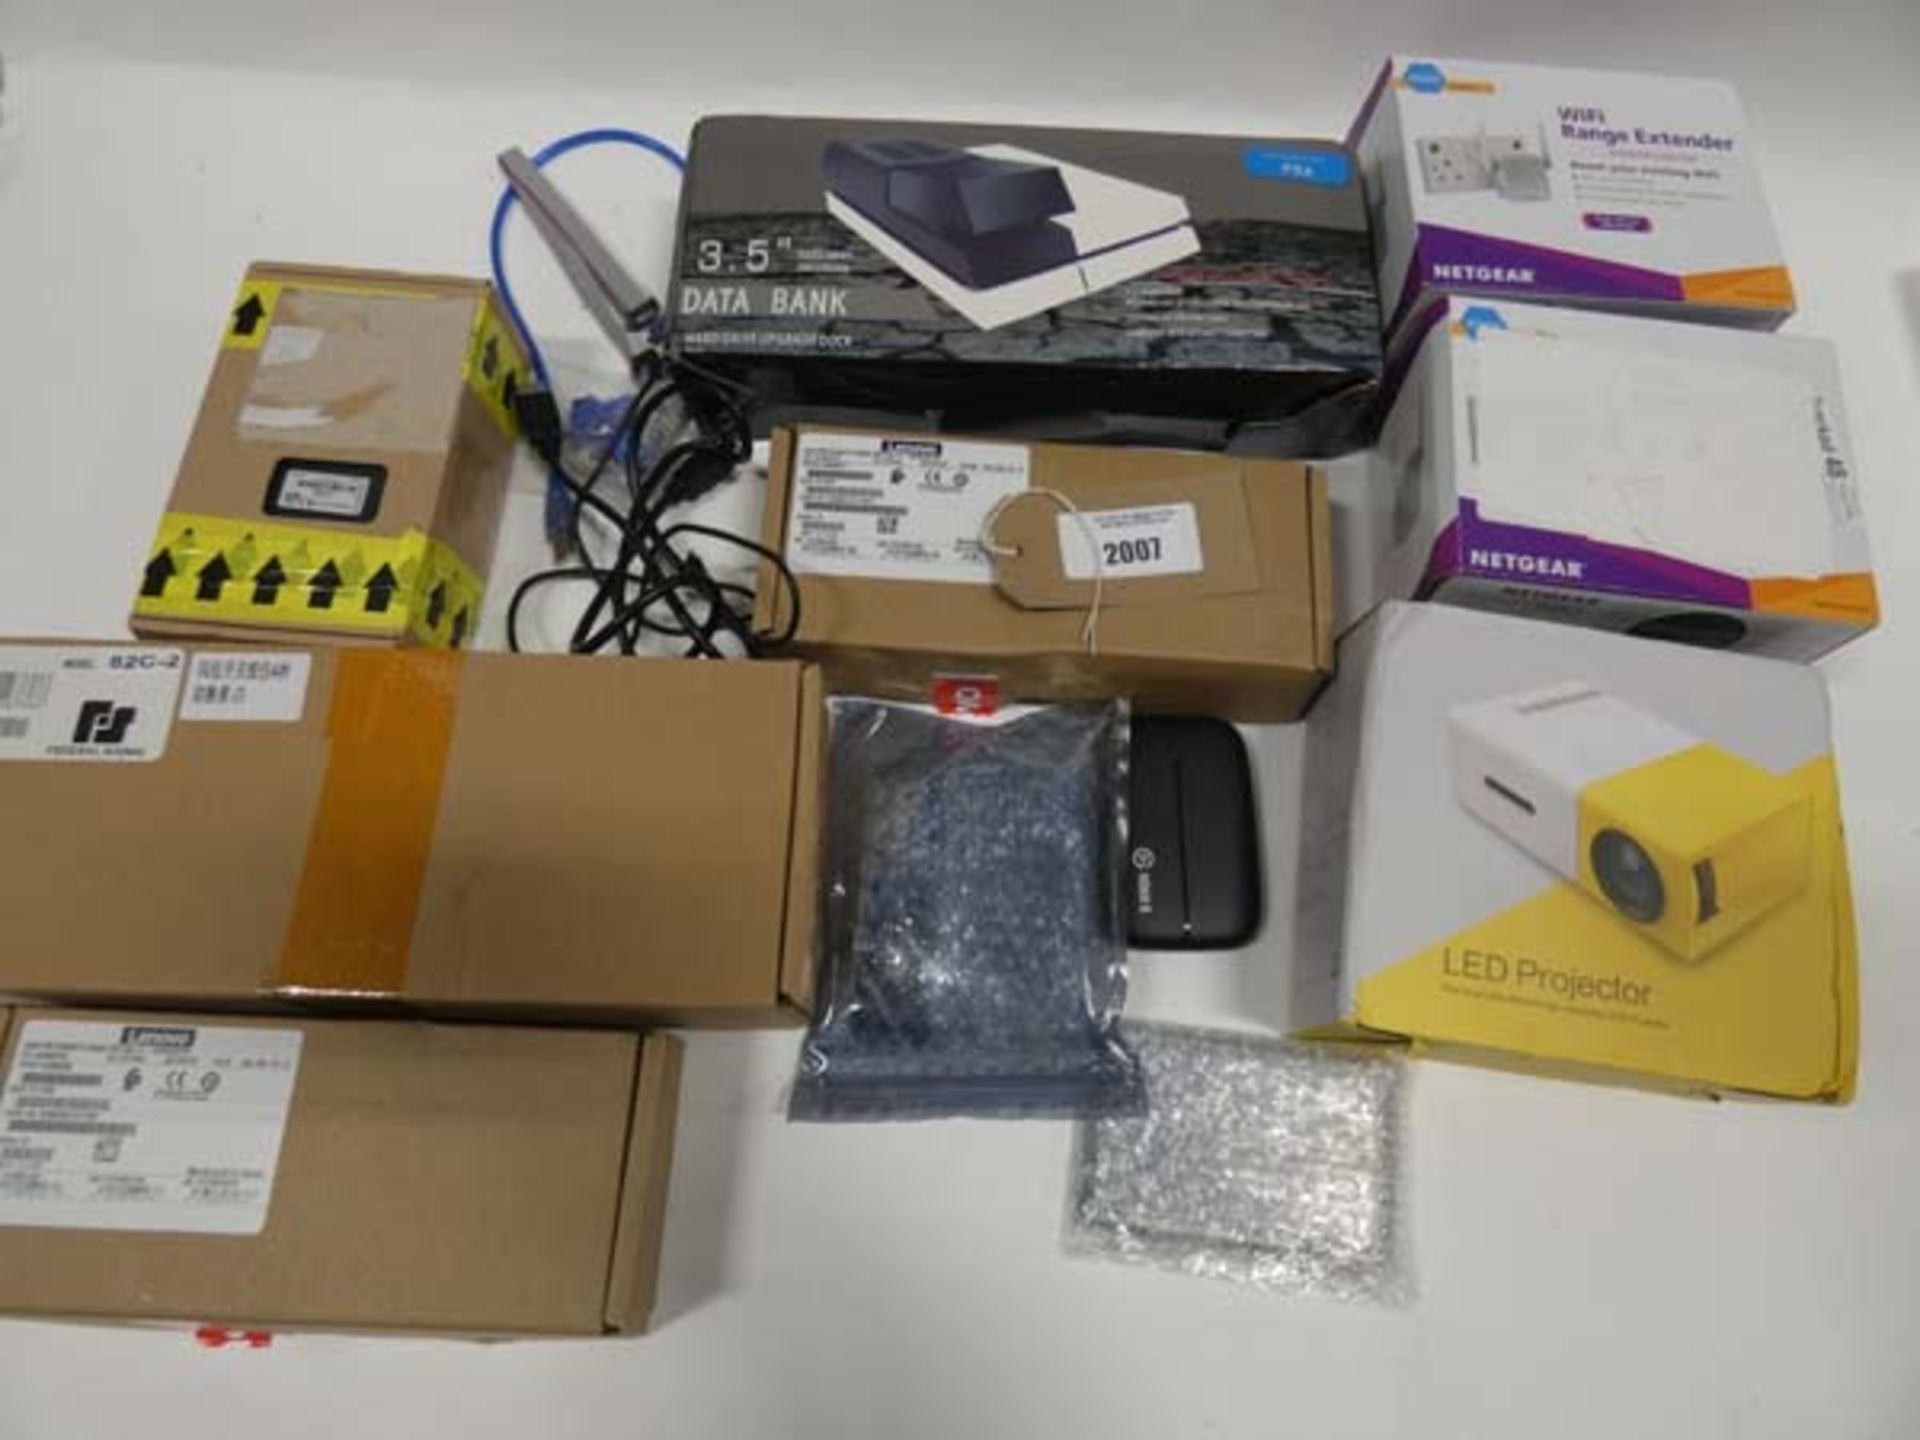 Bag containing LED projector, Netgear WiFi range extenders, power supplies, 3.5 data bank for PS4,